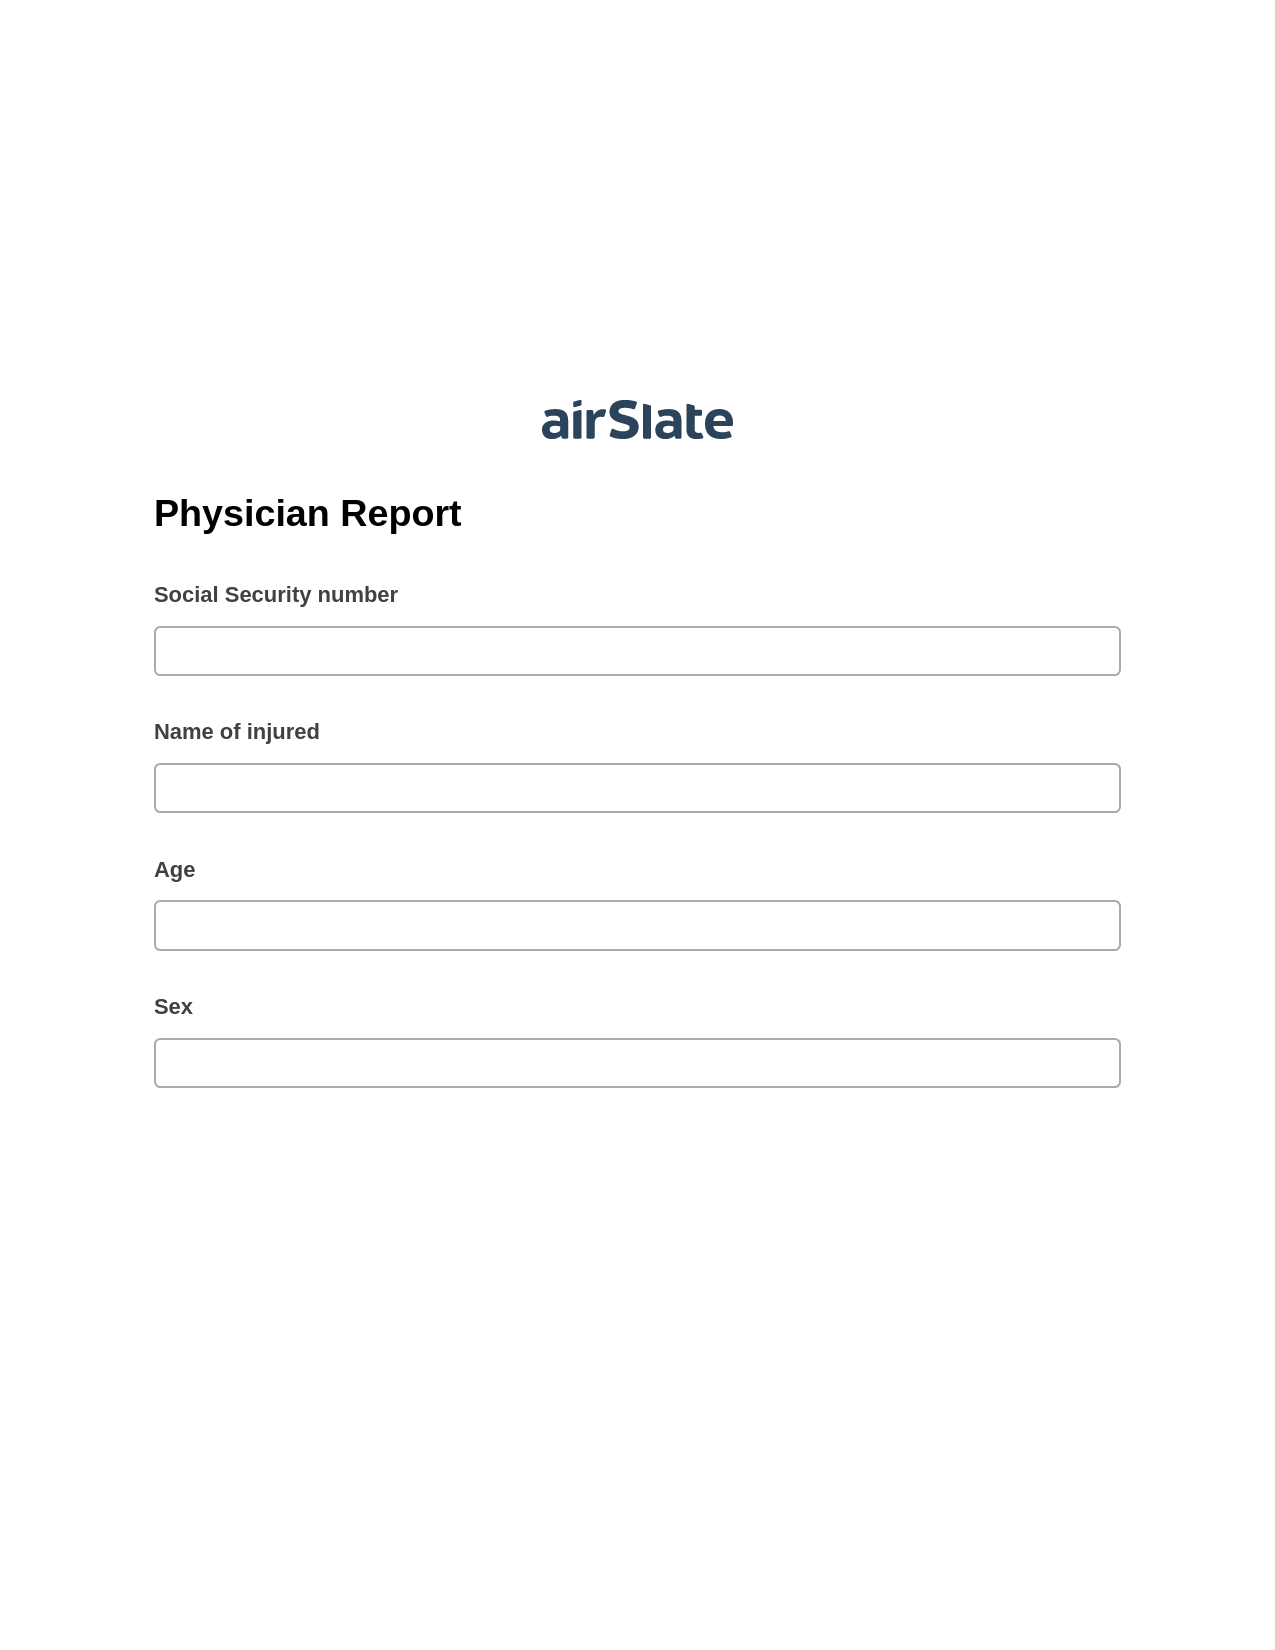 Multirole Physician Report Pre-fill Dropdowns from Airtable, Update NetSuite Record Bot, Export to Excel 365 Bot